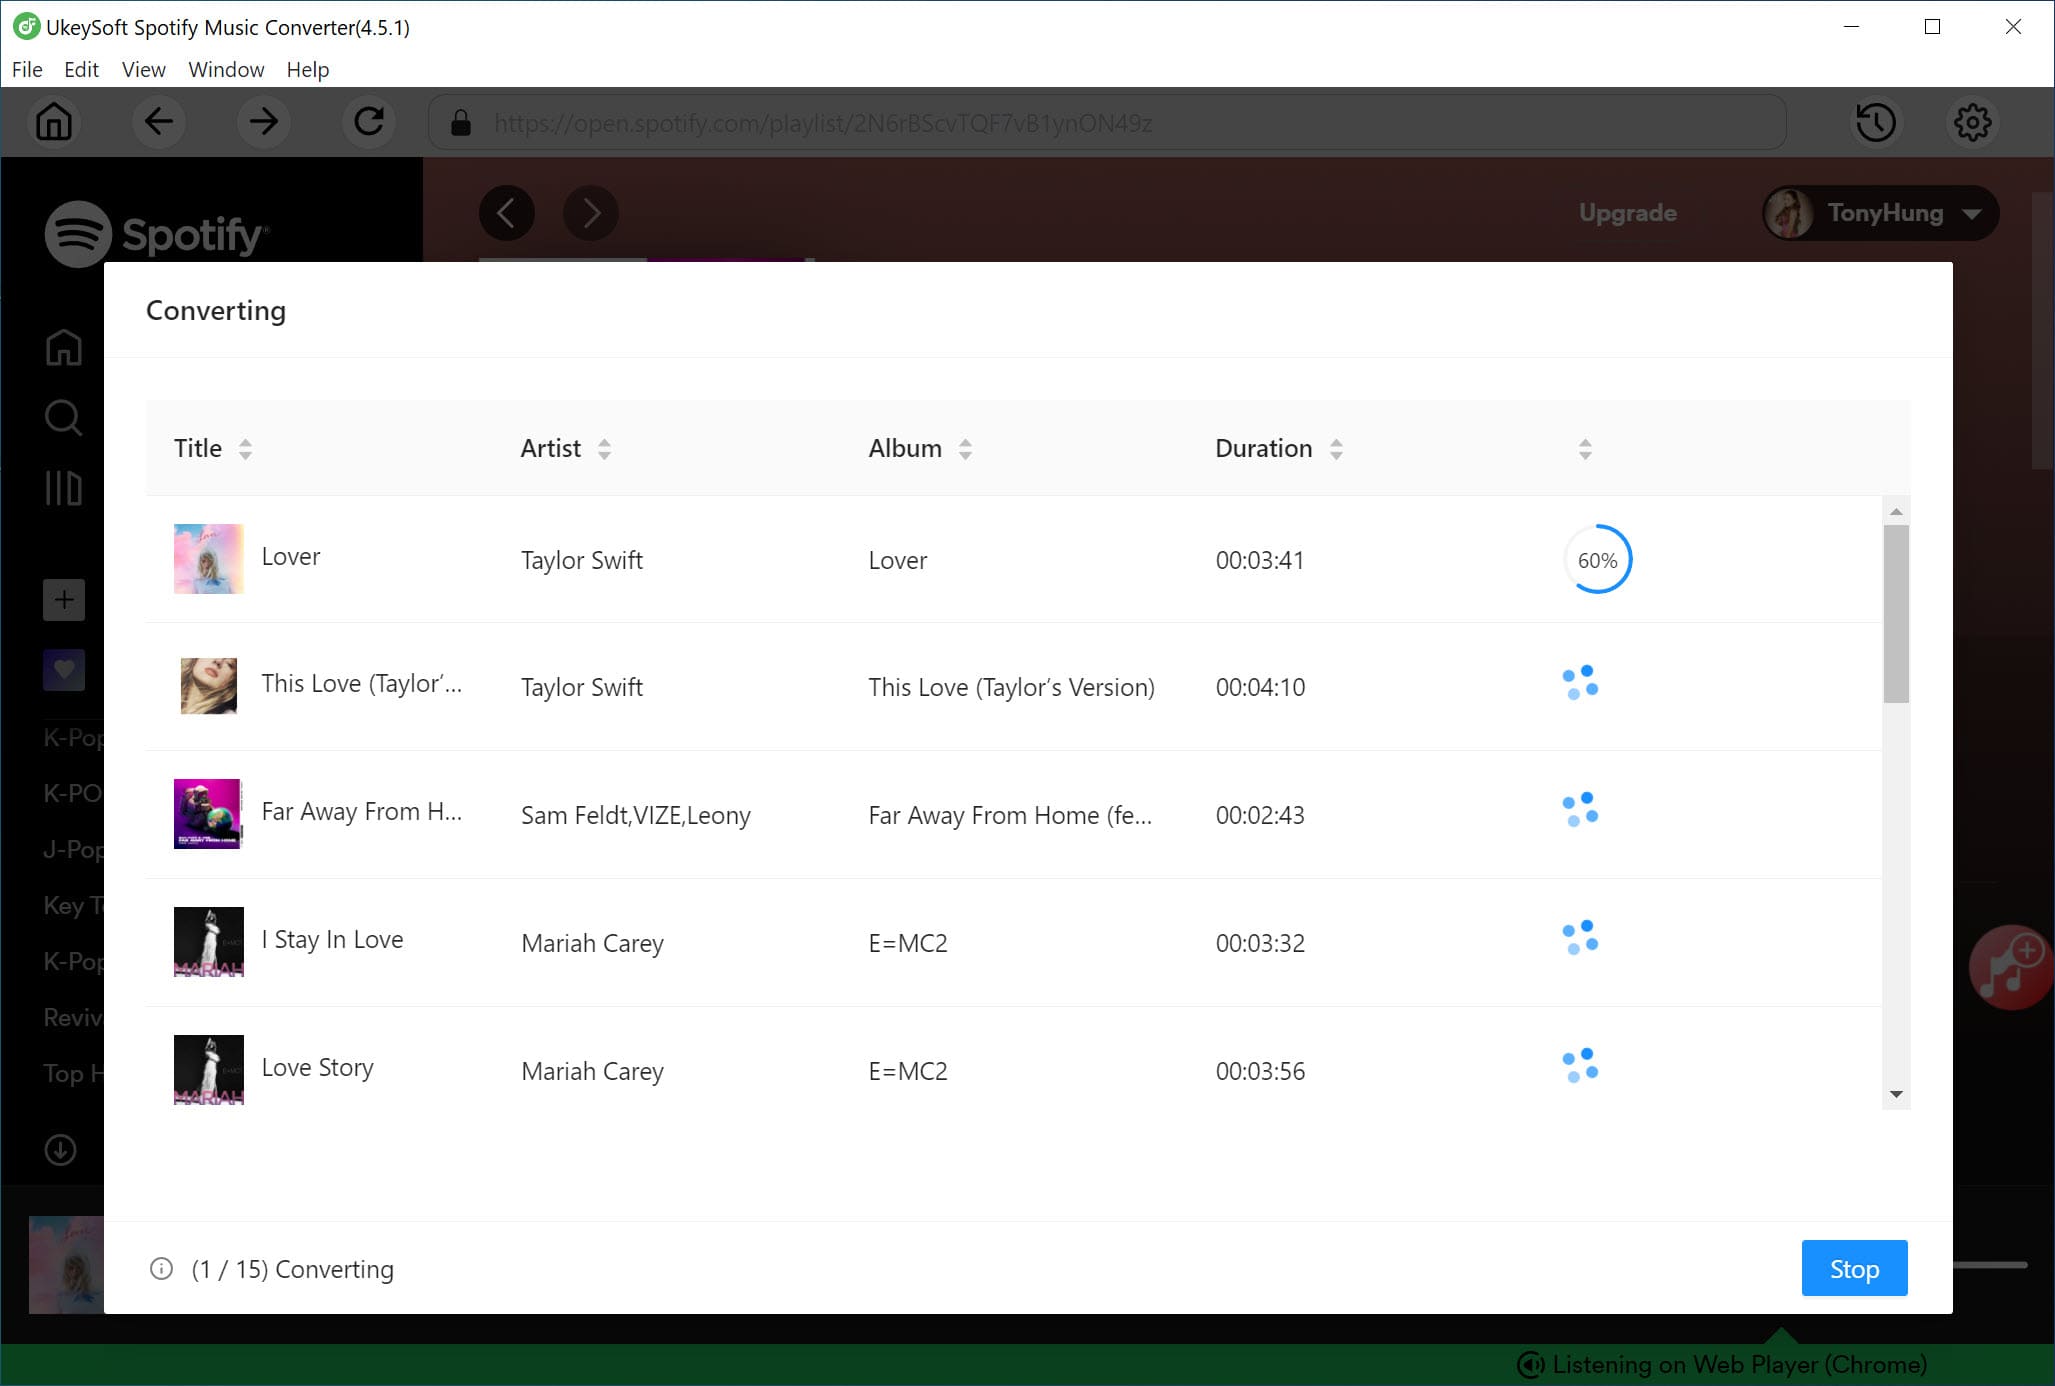 Is it illegal to convert Spotify music to mp3?